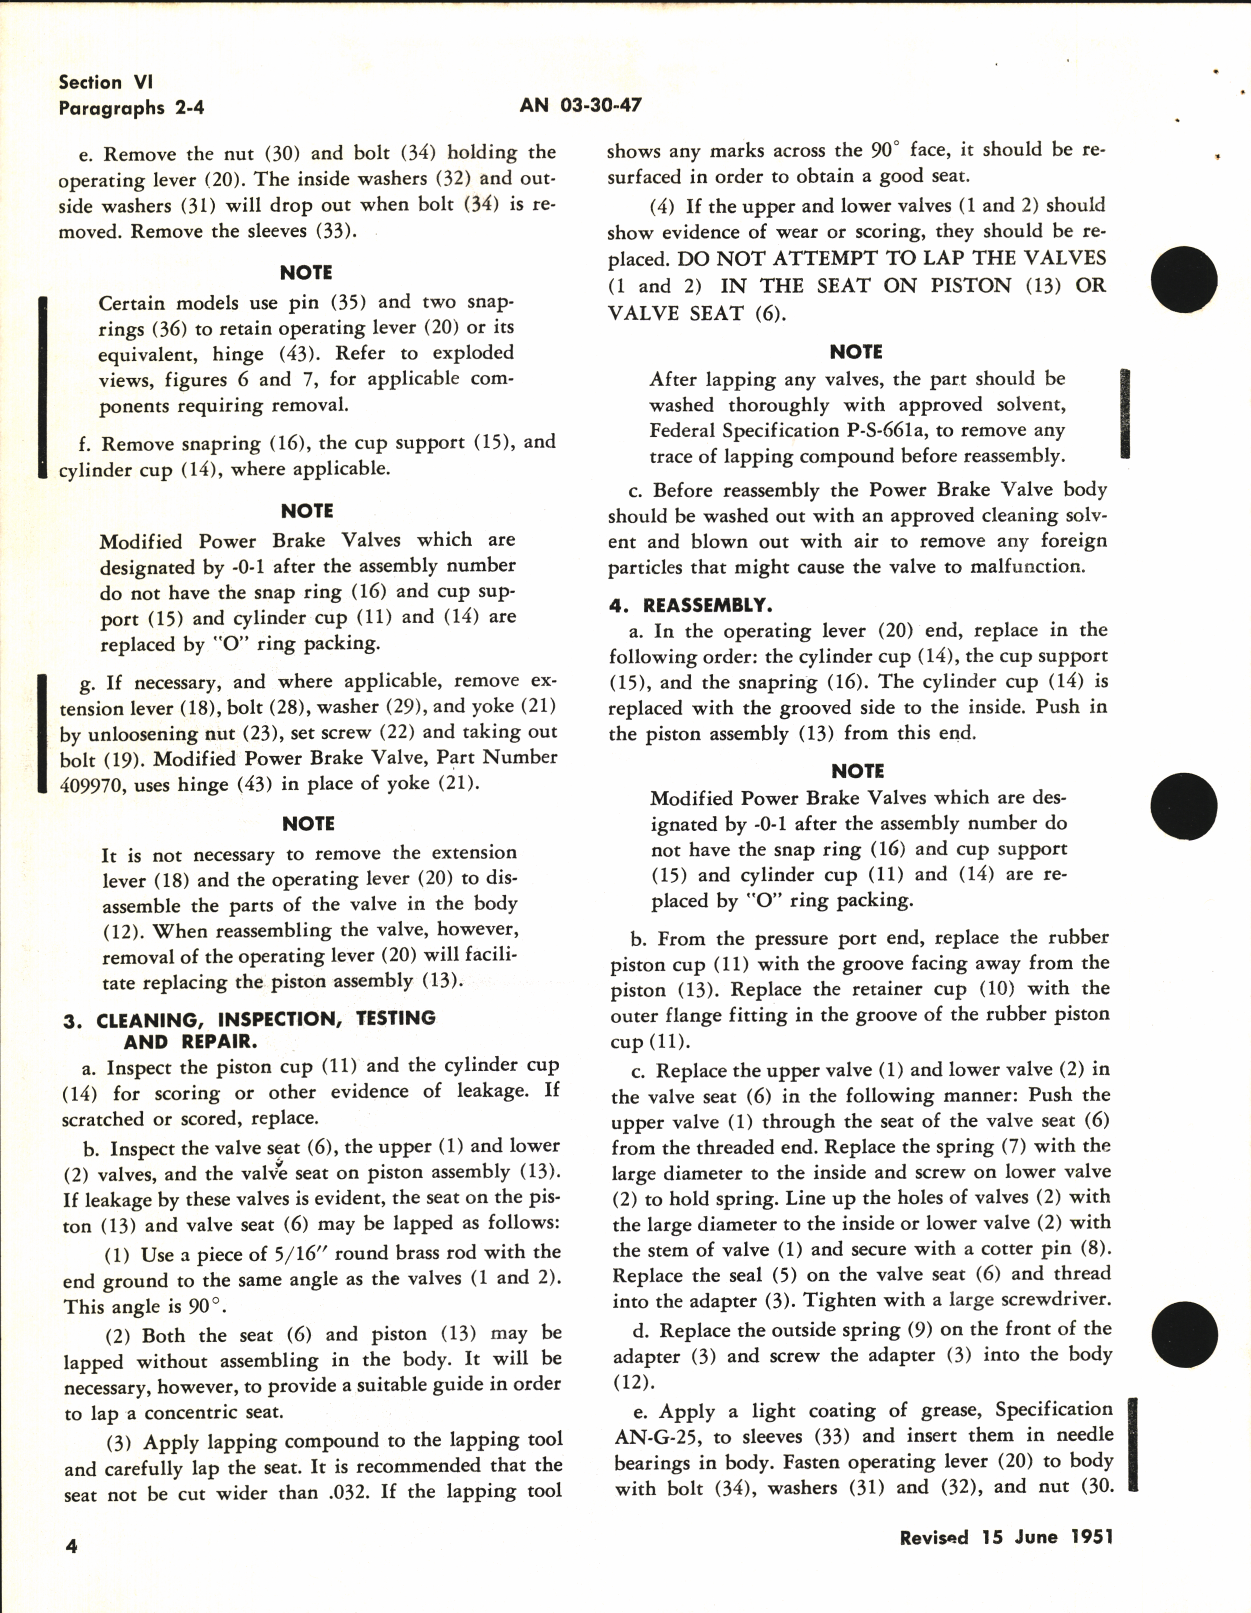 Sample page 8 from AirCorps Library document: Operation, Service & Overhaul Instructions with Parts Catalog for Power Brake Valves